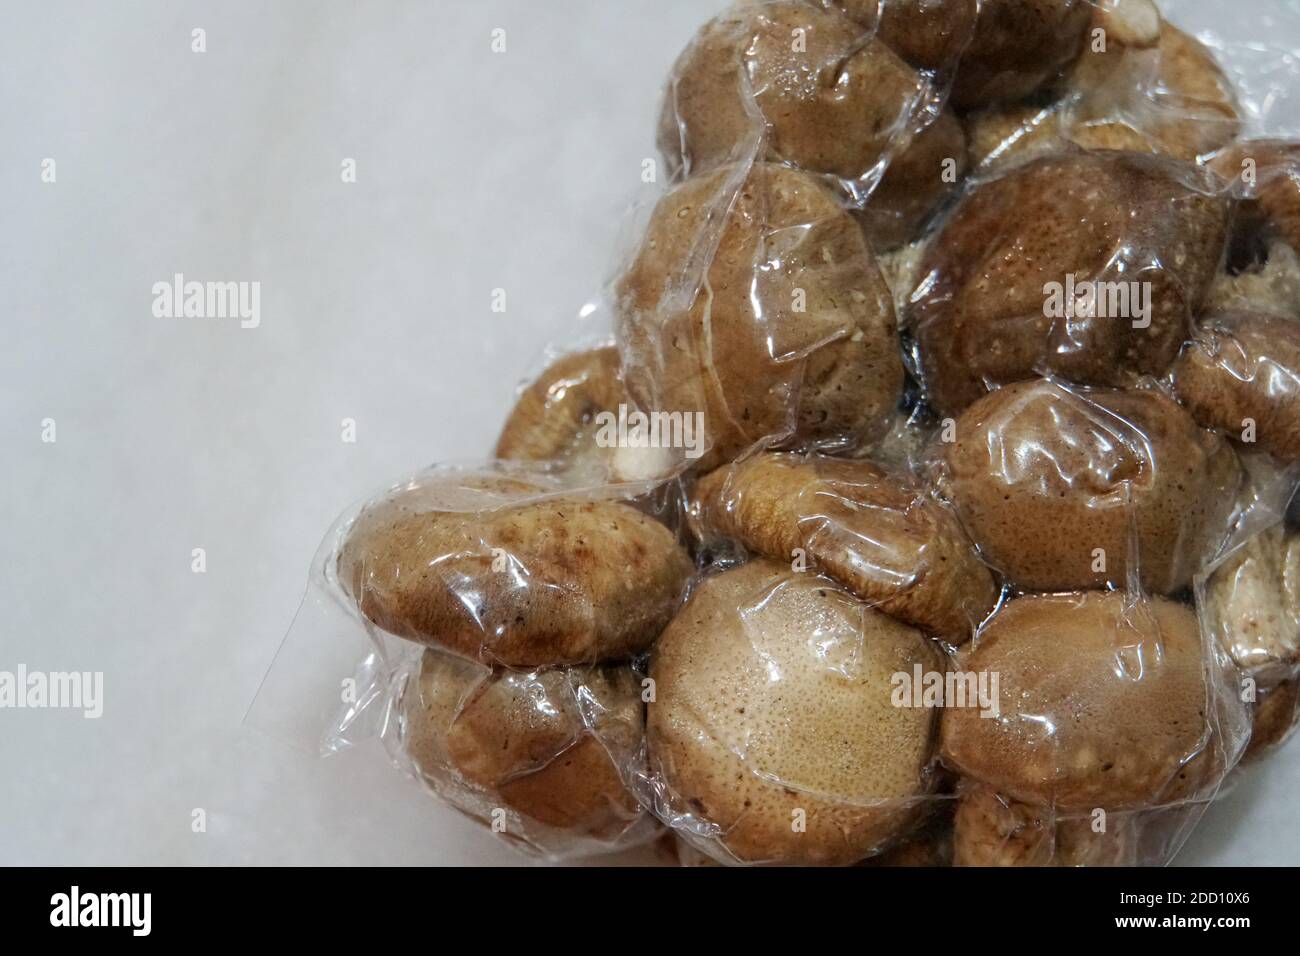 A vacuum package of raw brown shiitake mushrooms, on a white marble surface. Stock Photo